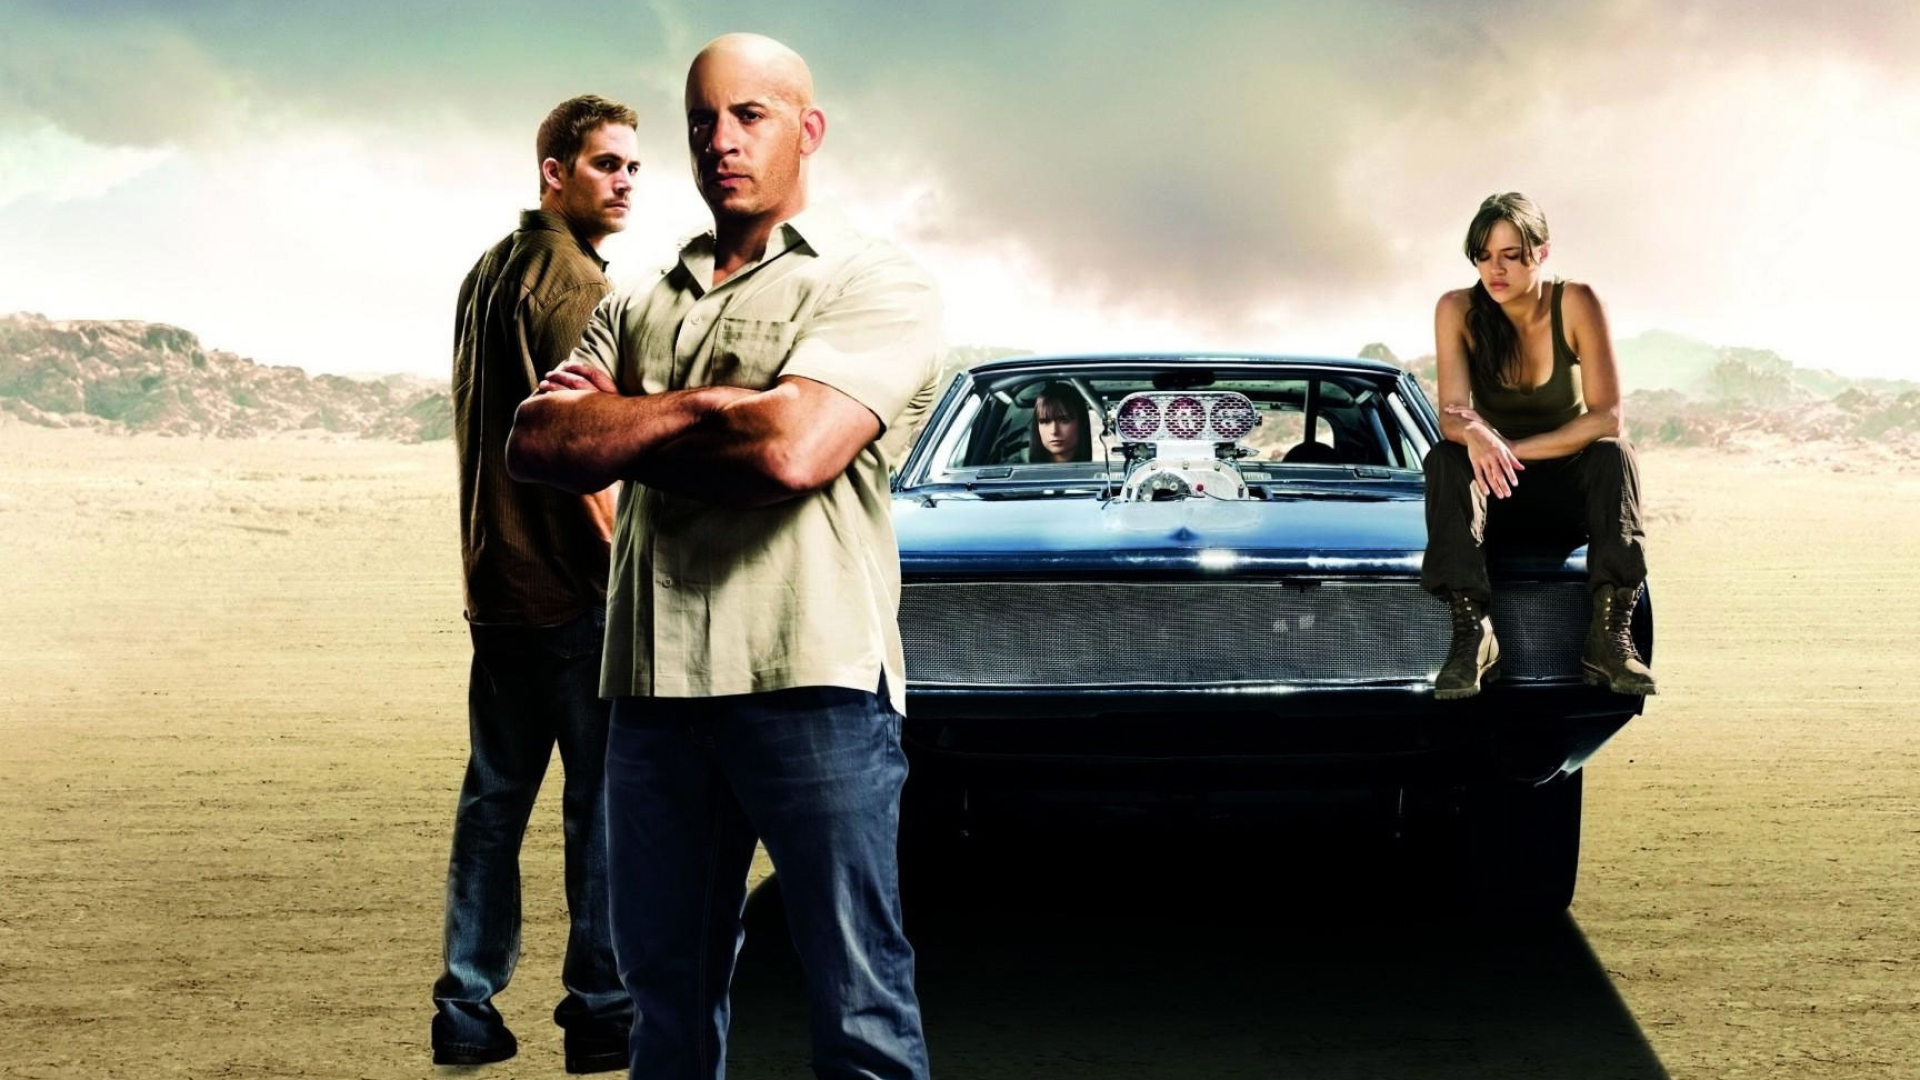 The Fast and the Furious, Fast & Furious 6, Wallpaper, Movie, 1920x1080 Full HD Desktop